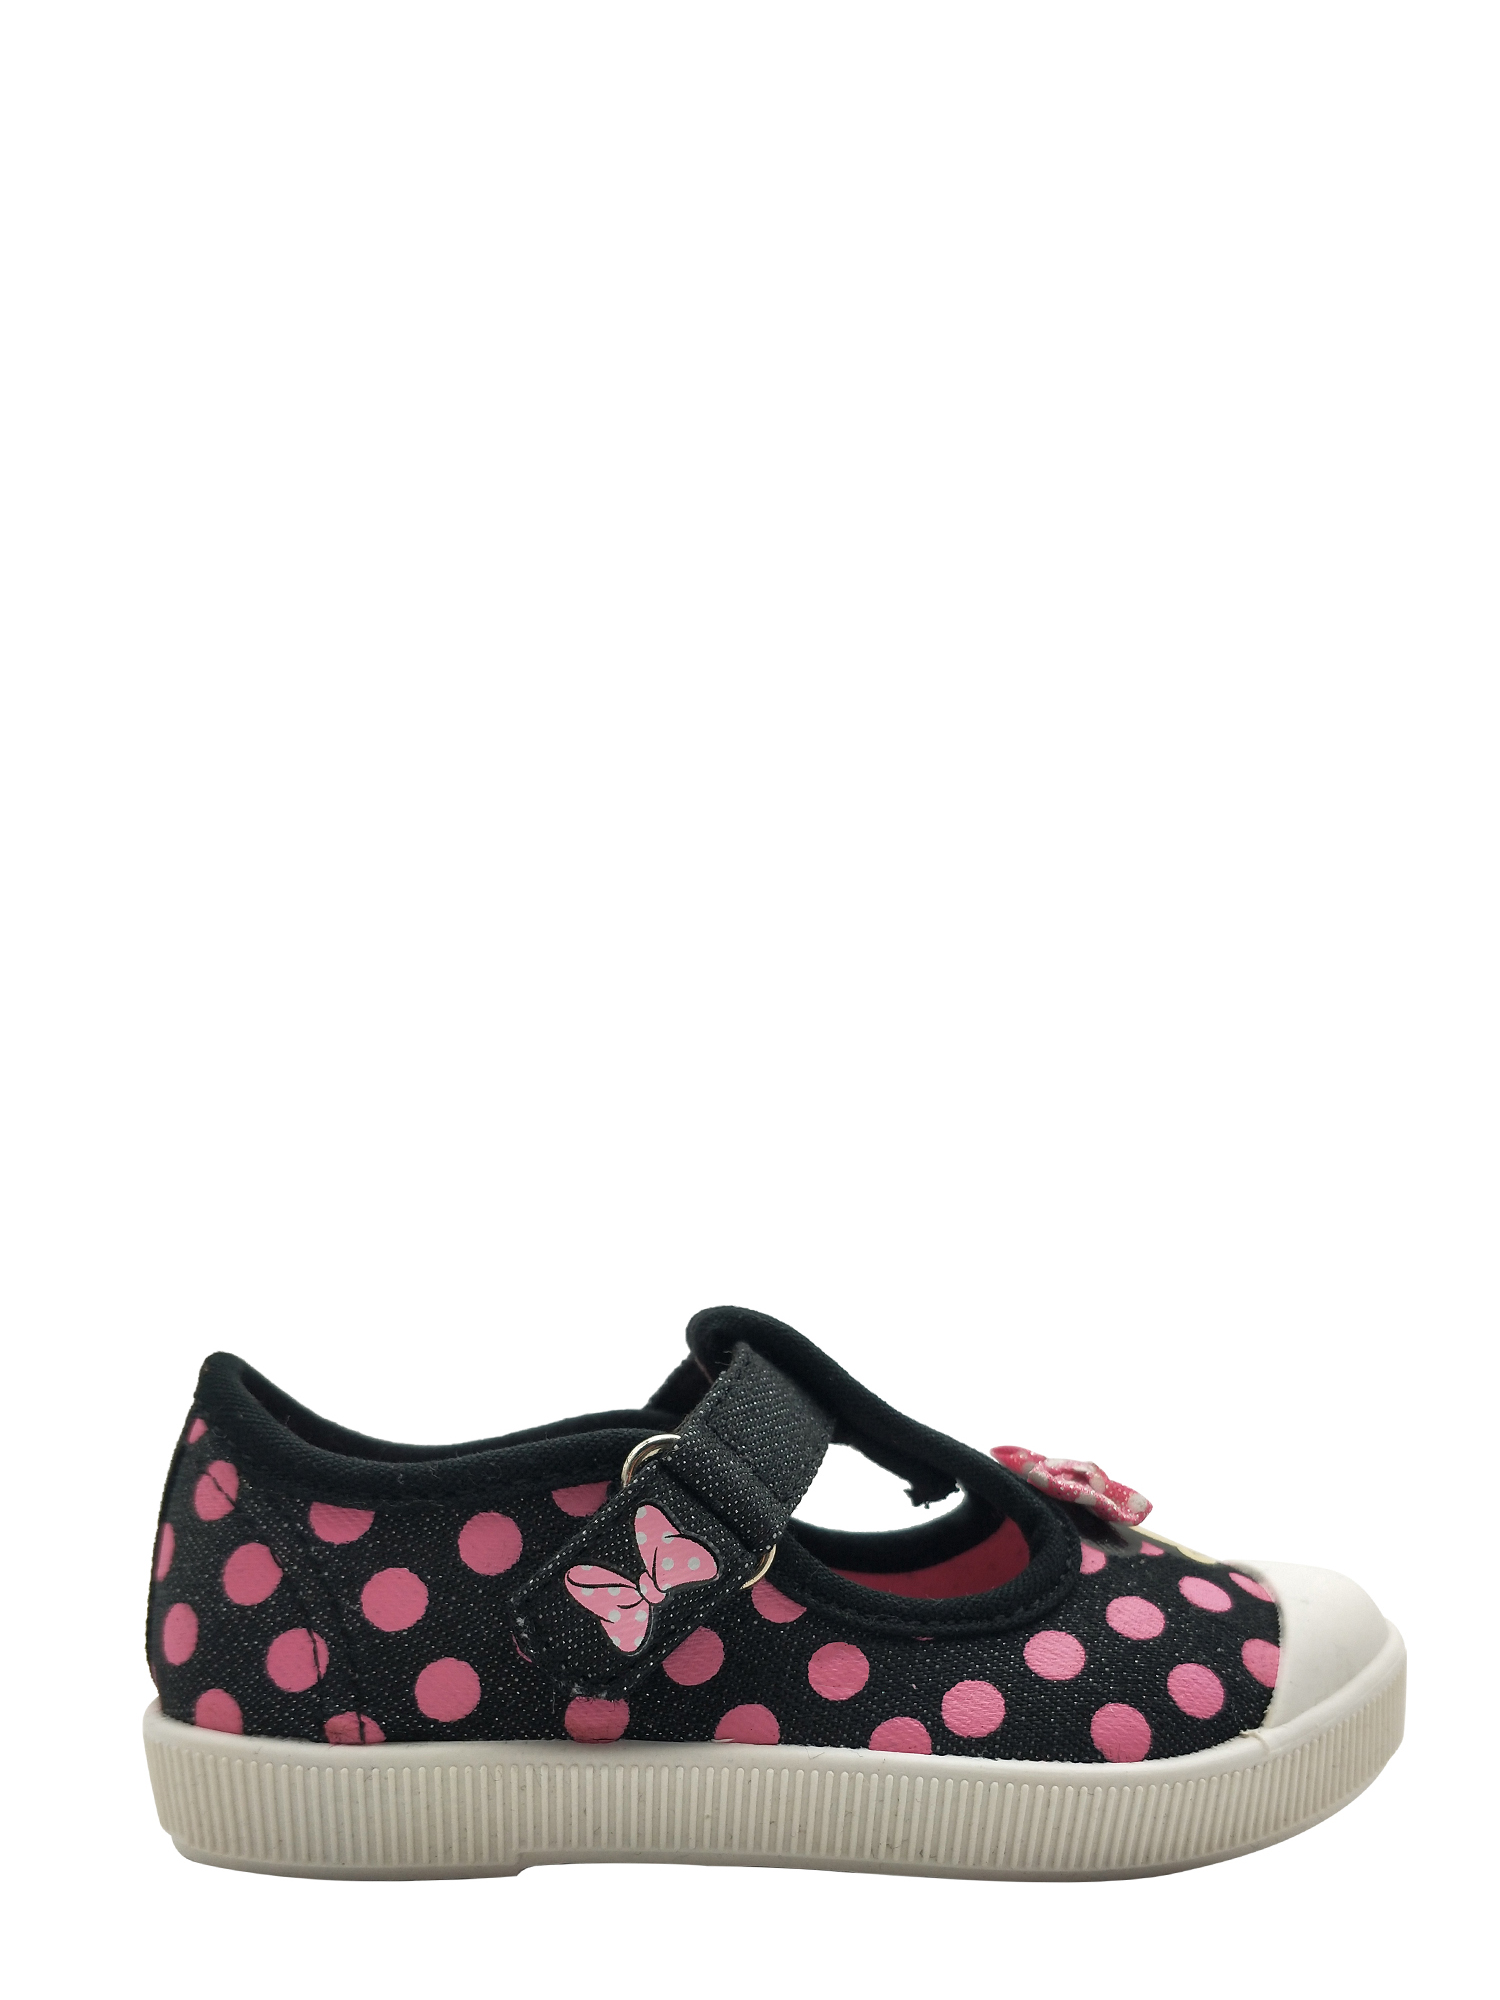 Minnie Mouse Polka Dot T-Strap Casual Shoe (Toddler Girls) - image 2 of 6